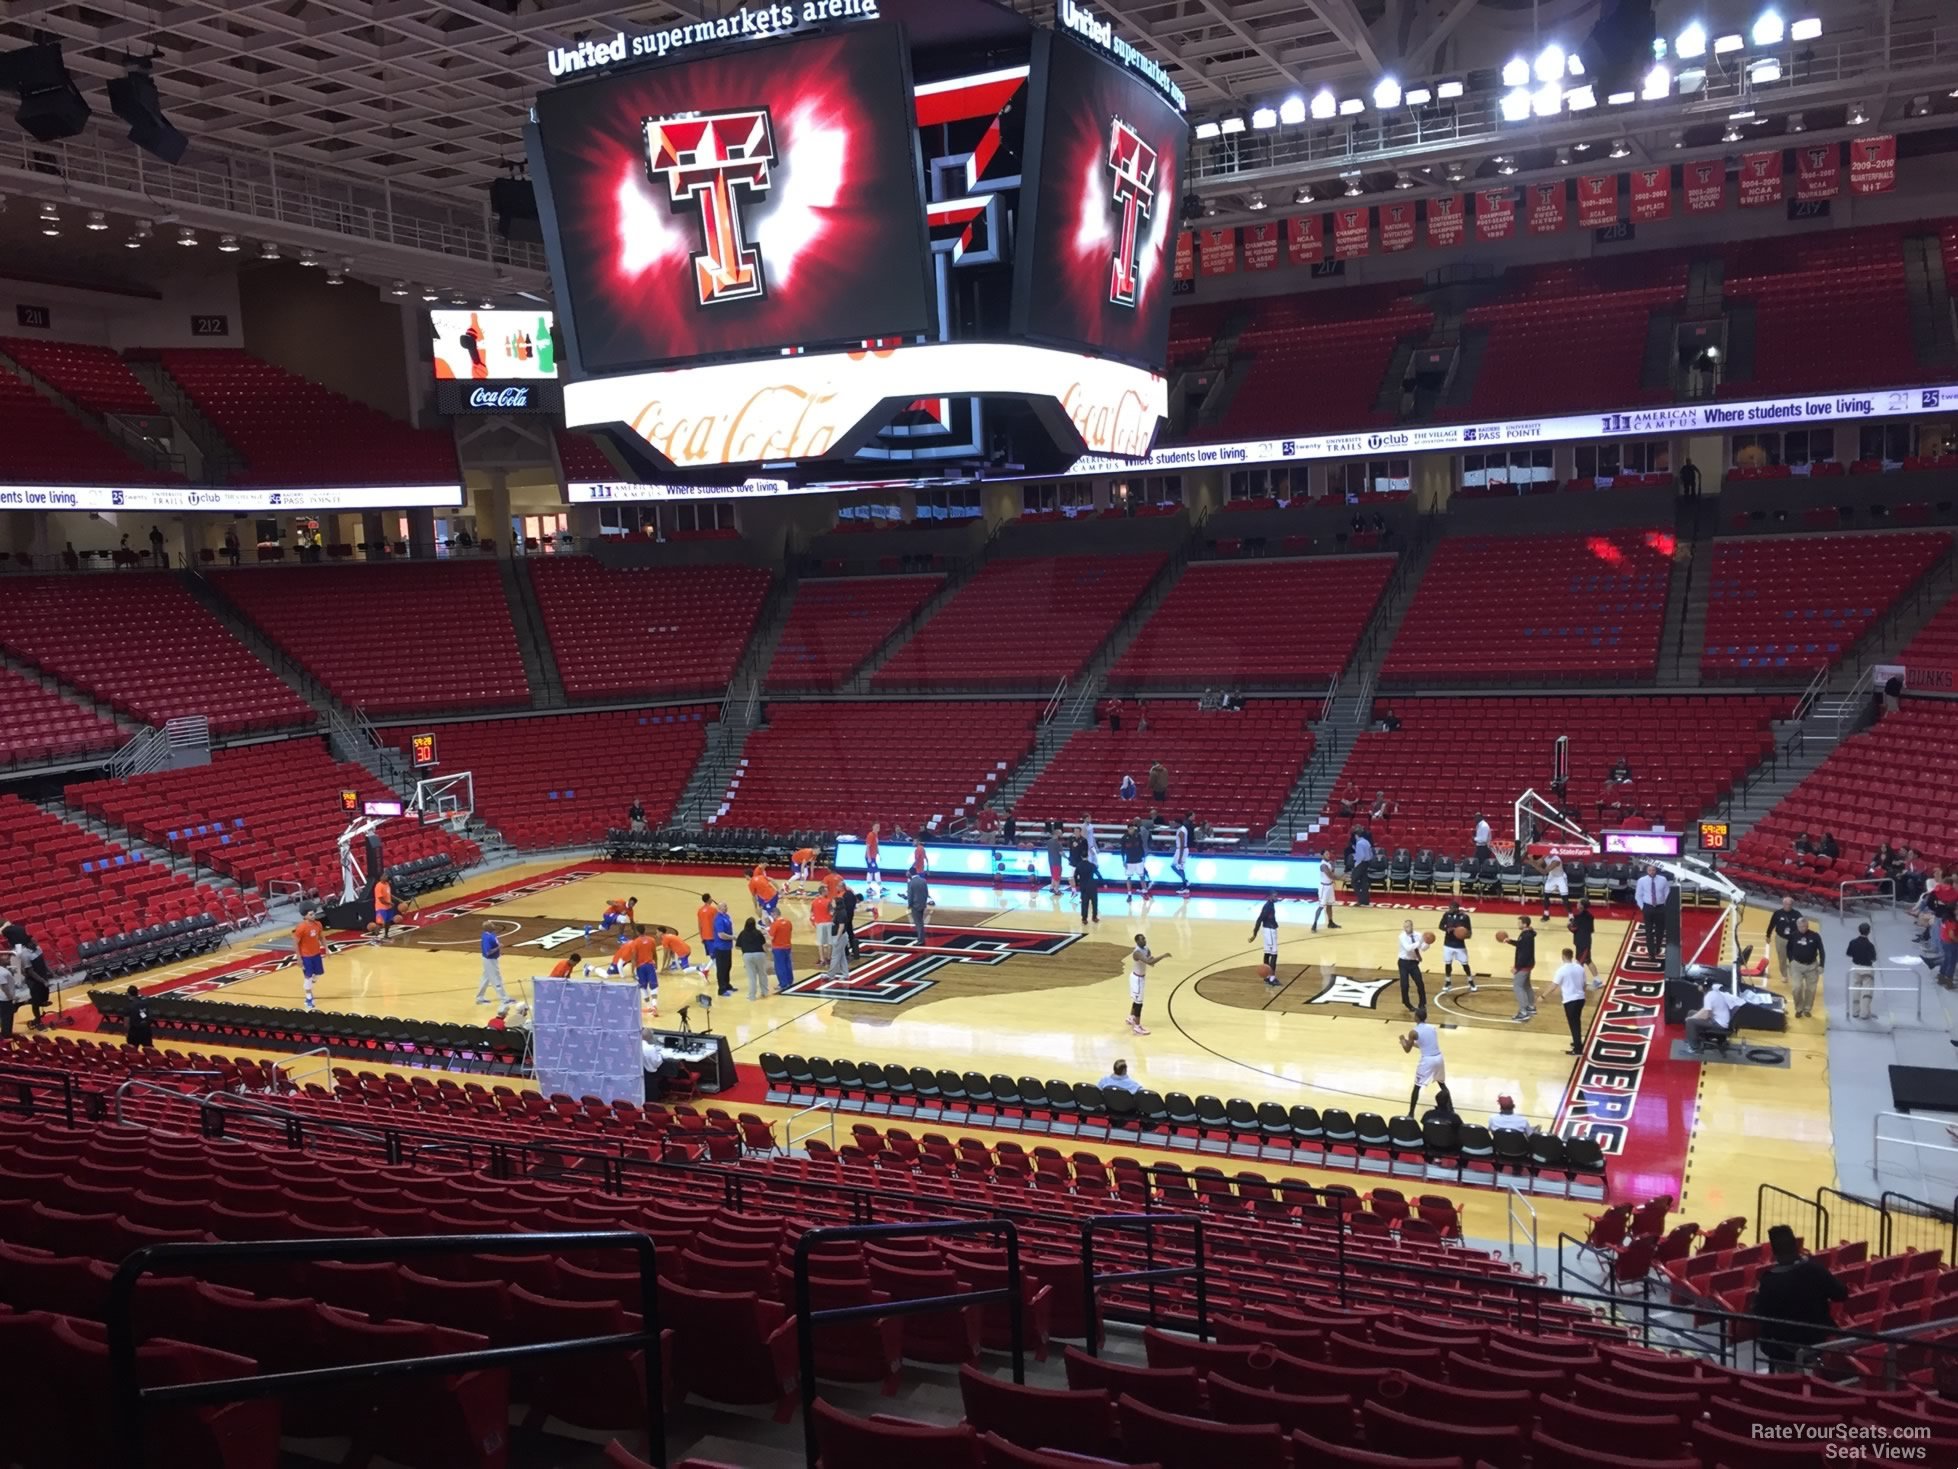 section 123, row 25 seat view  - united supermarkets arena